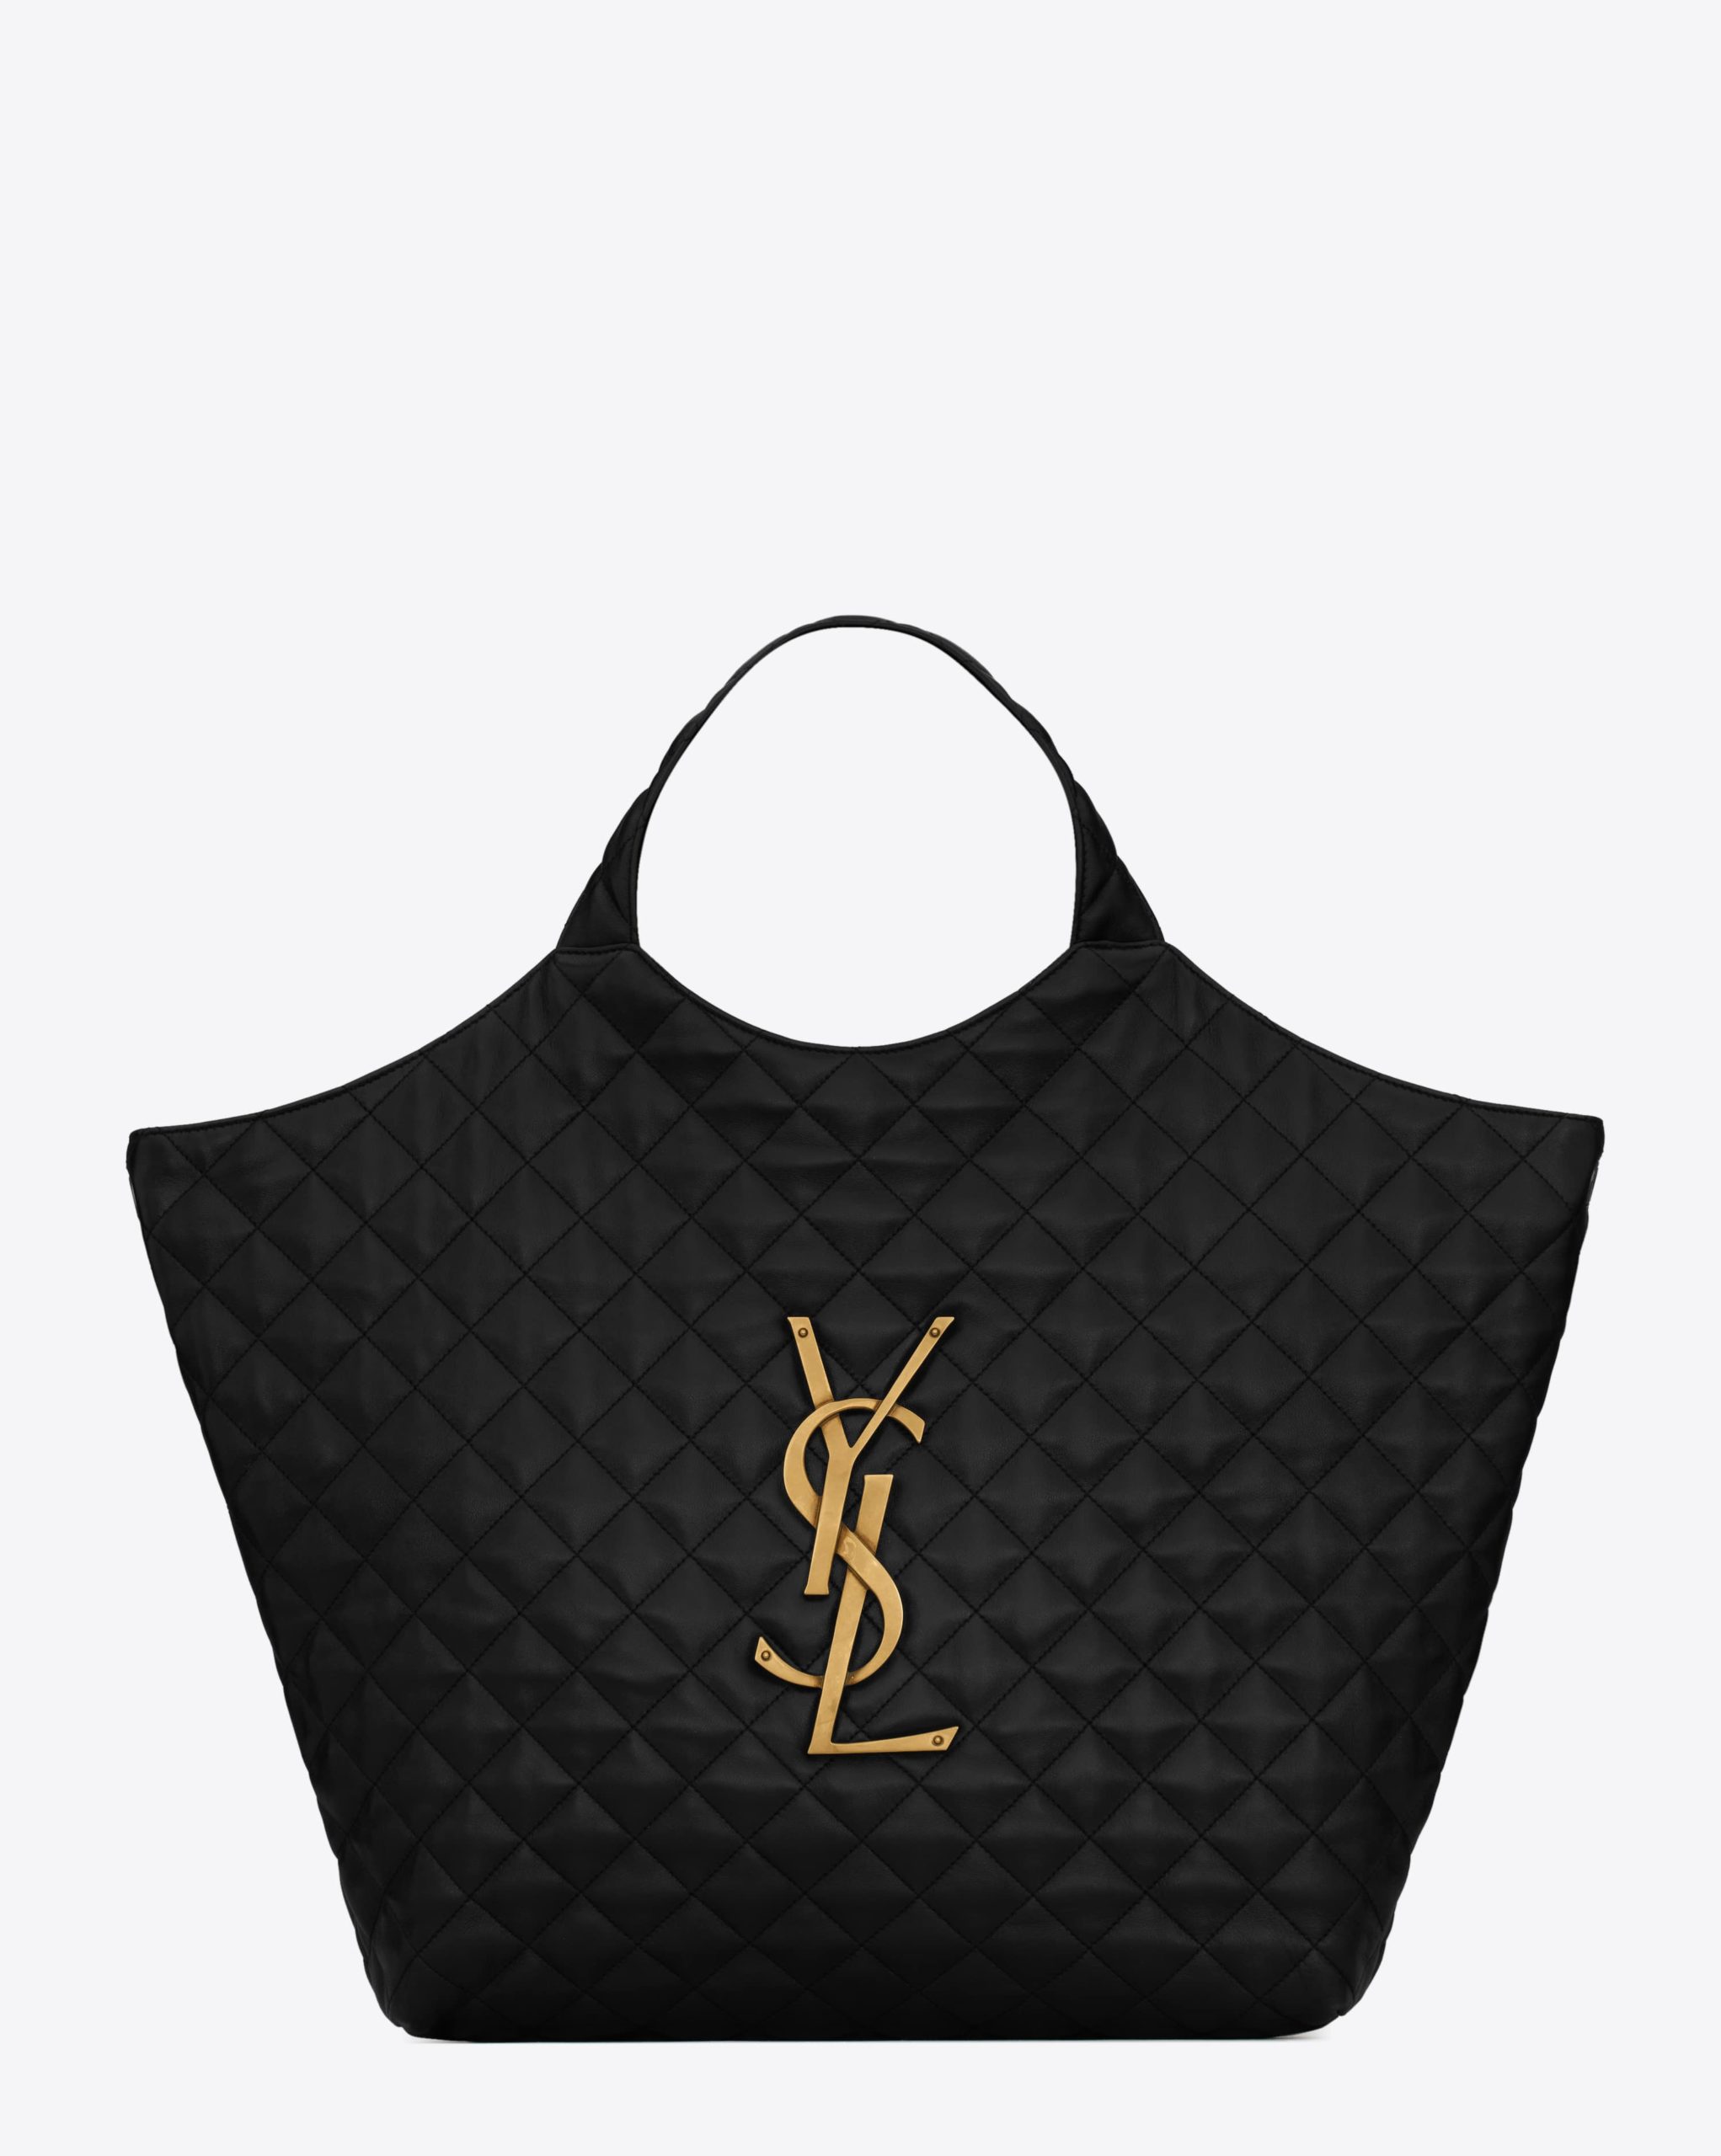 The Ultimate Saint Laurent Icare Bag Review To Read Before Buying - CLOSS  FASHION